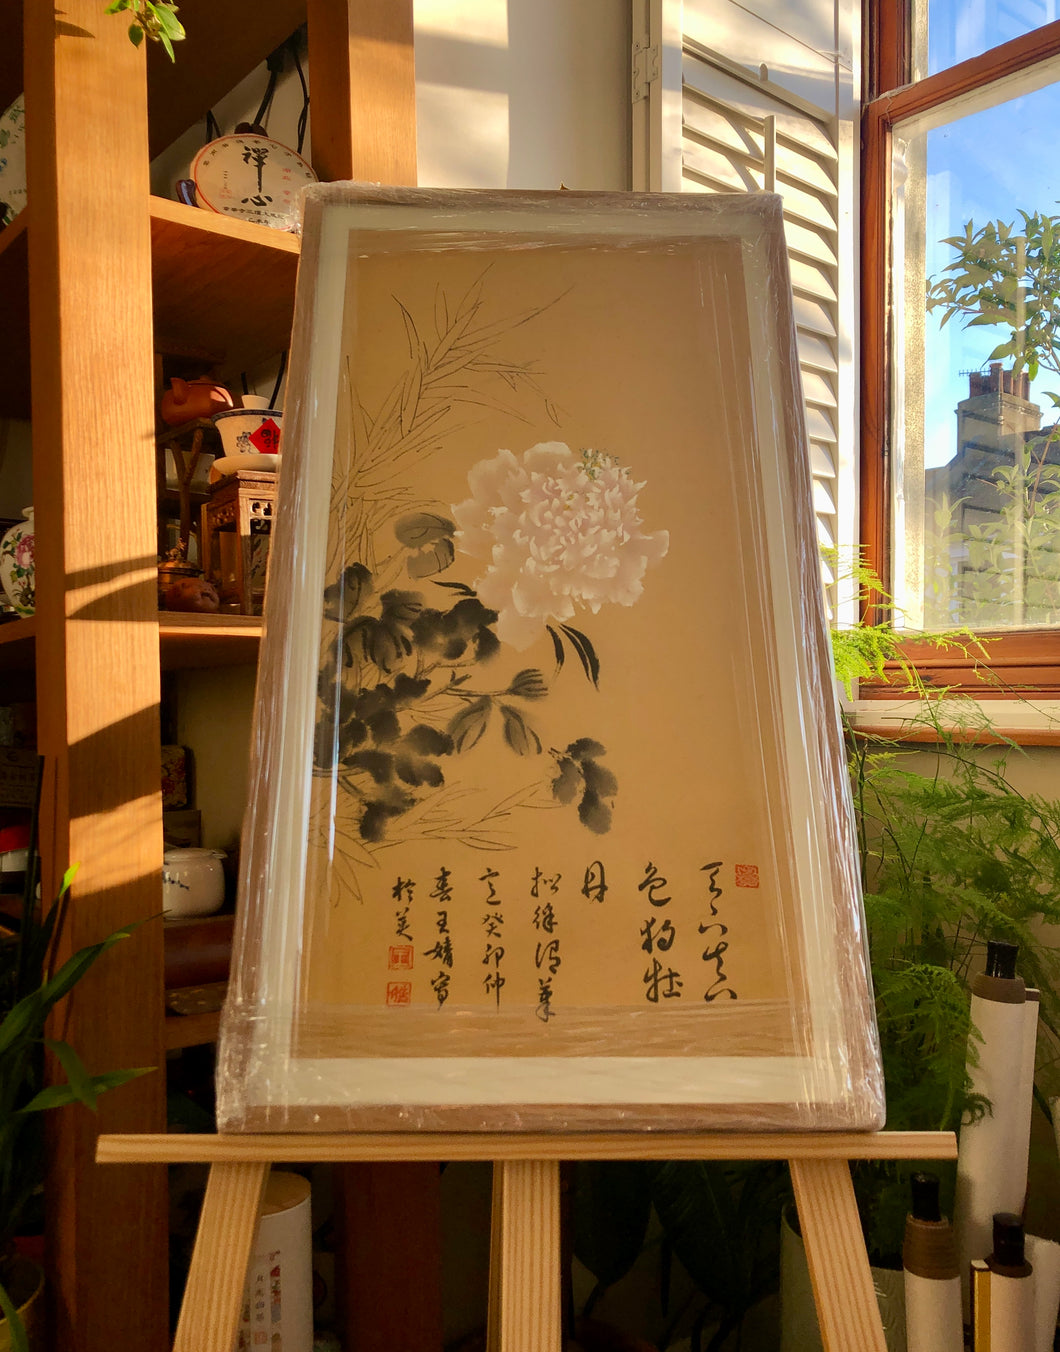 Oriental Elegance 東方之雅, Original Chinese Painting on Gold Flake Xuan Rice Paper, Painted in Brighton UK